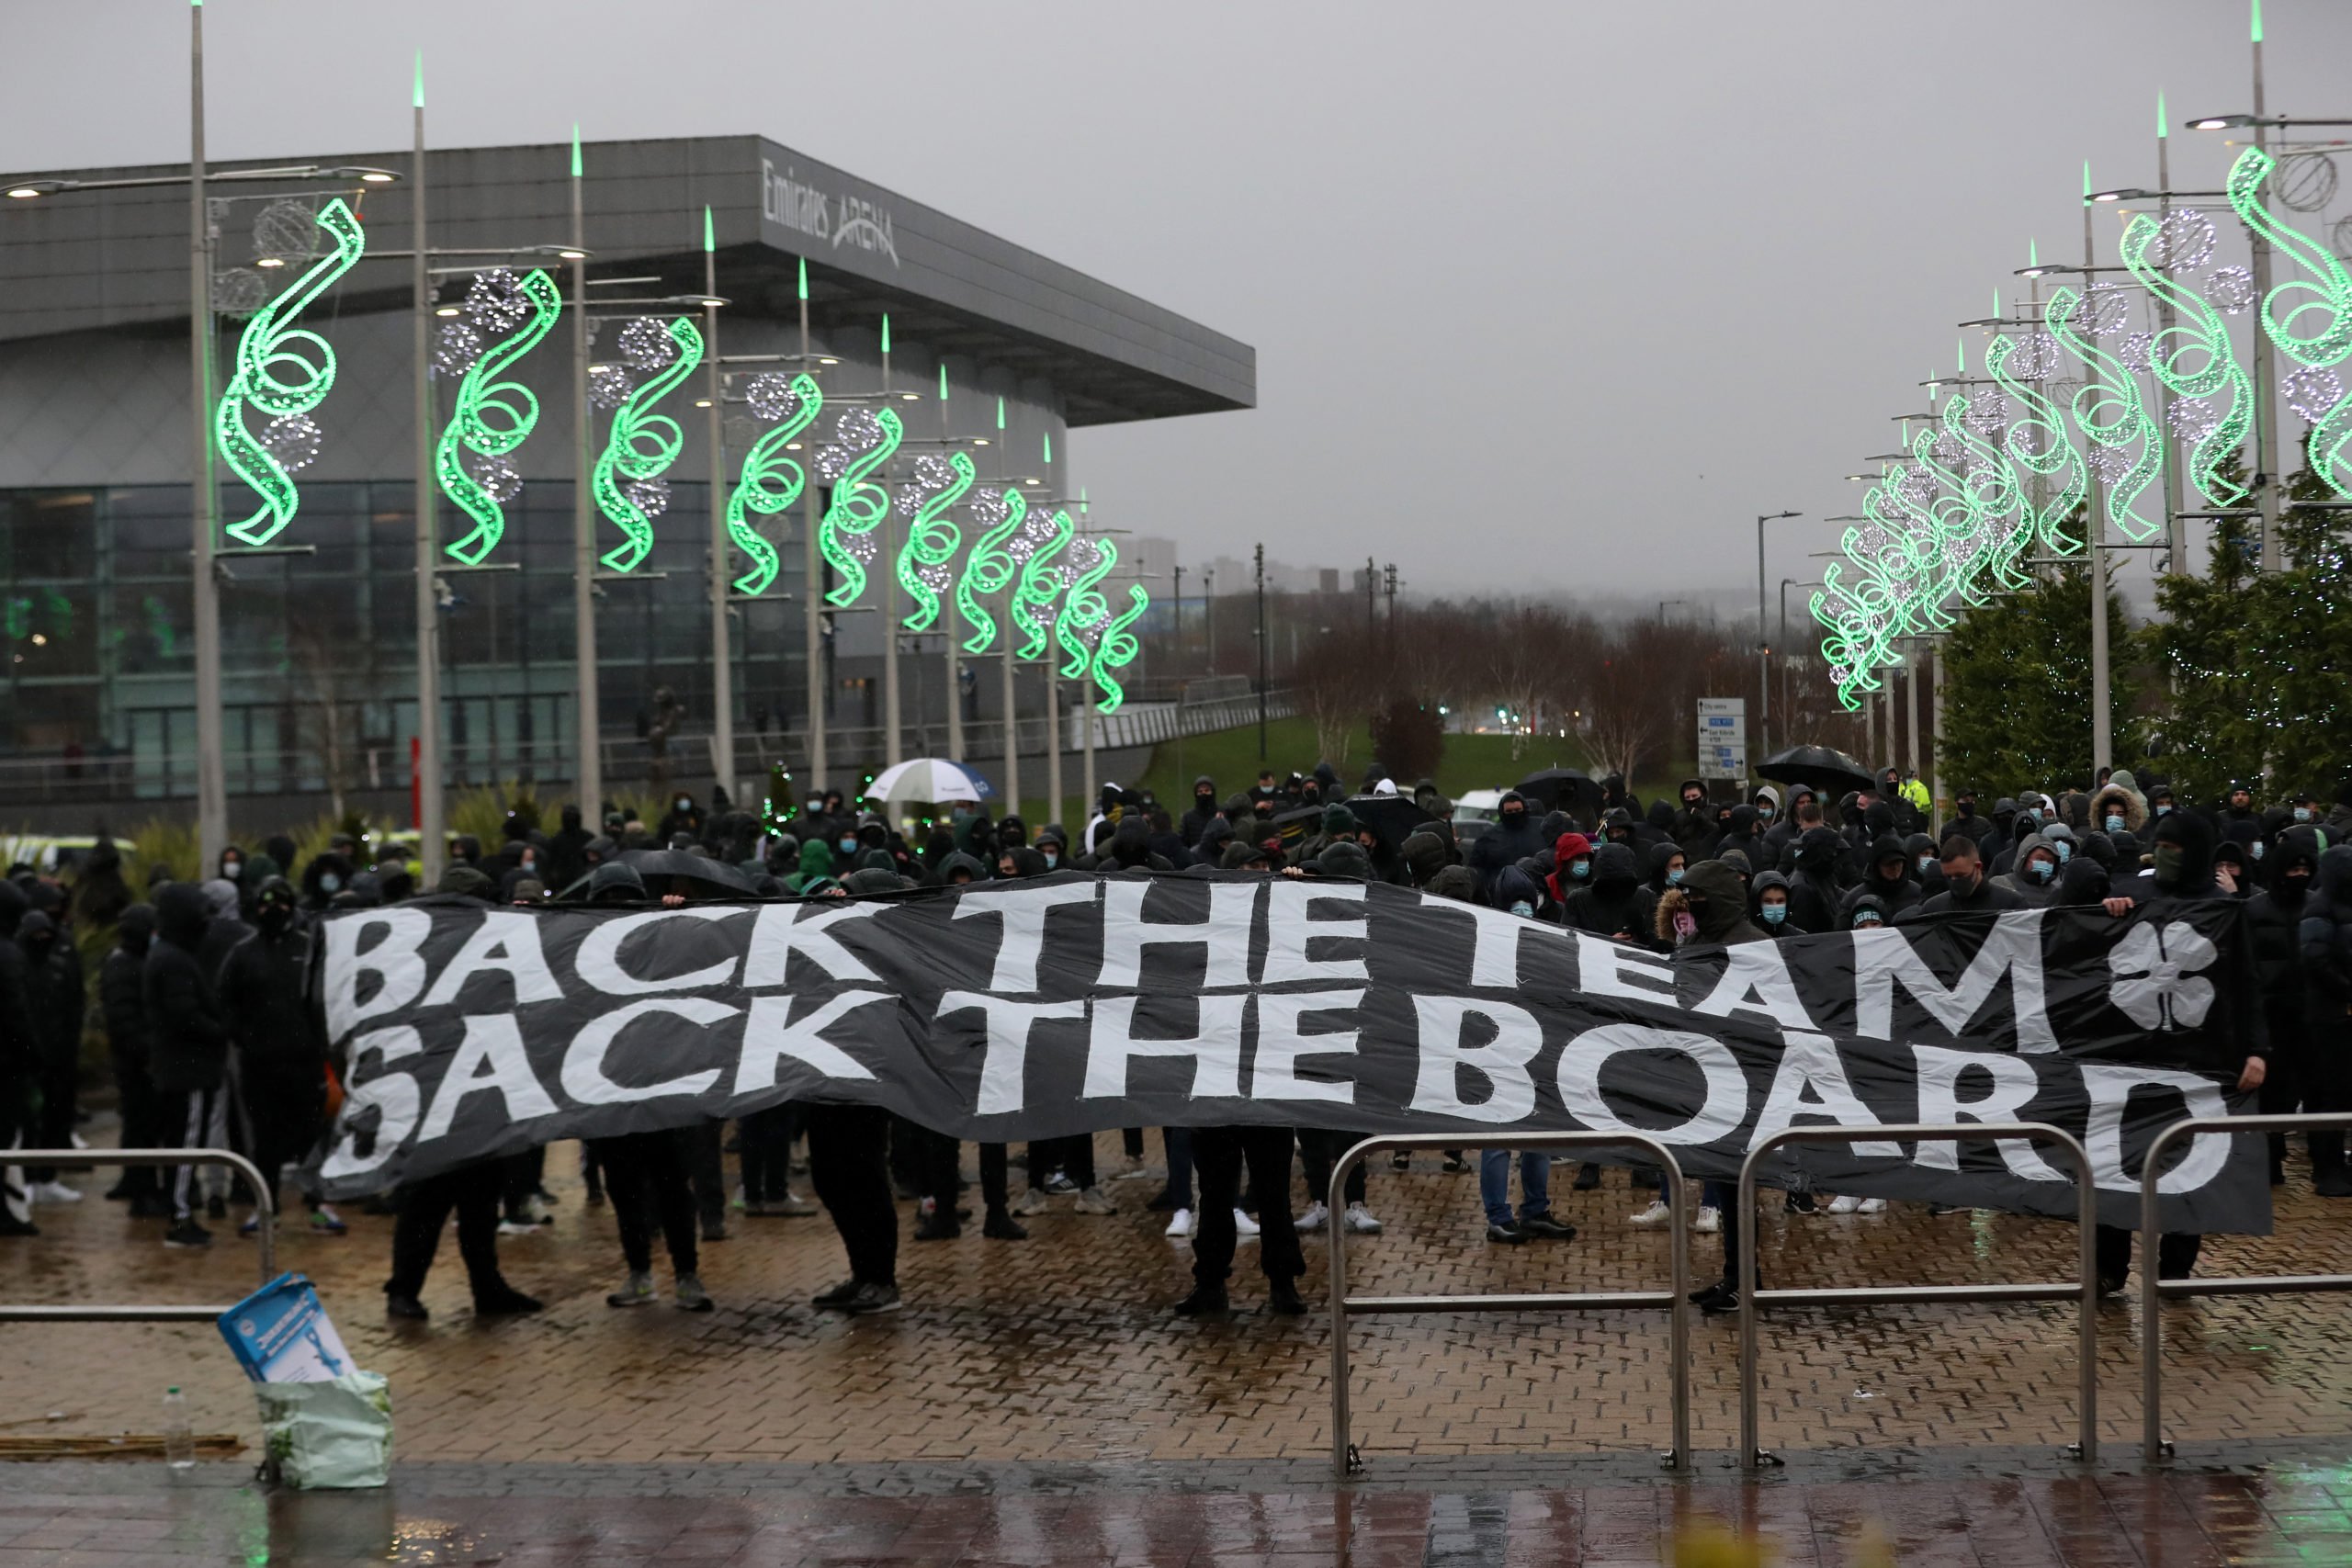 Celtic Trust appeal to shareholders amidst "disconnect" with Bhoys board